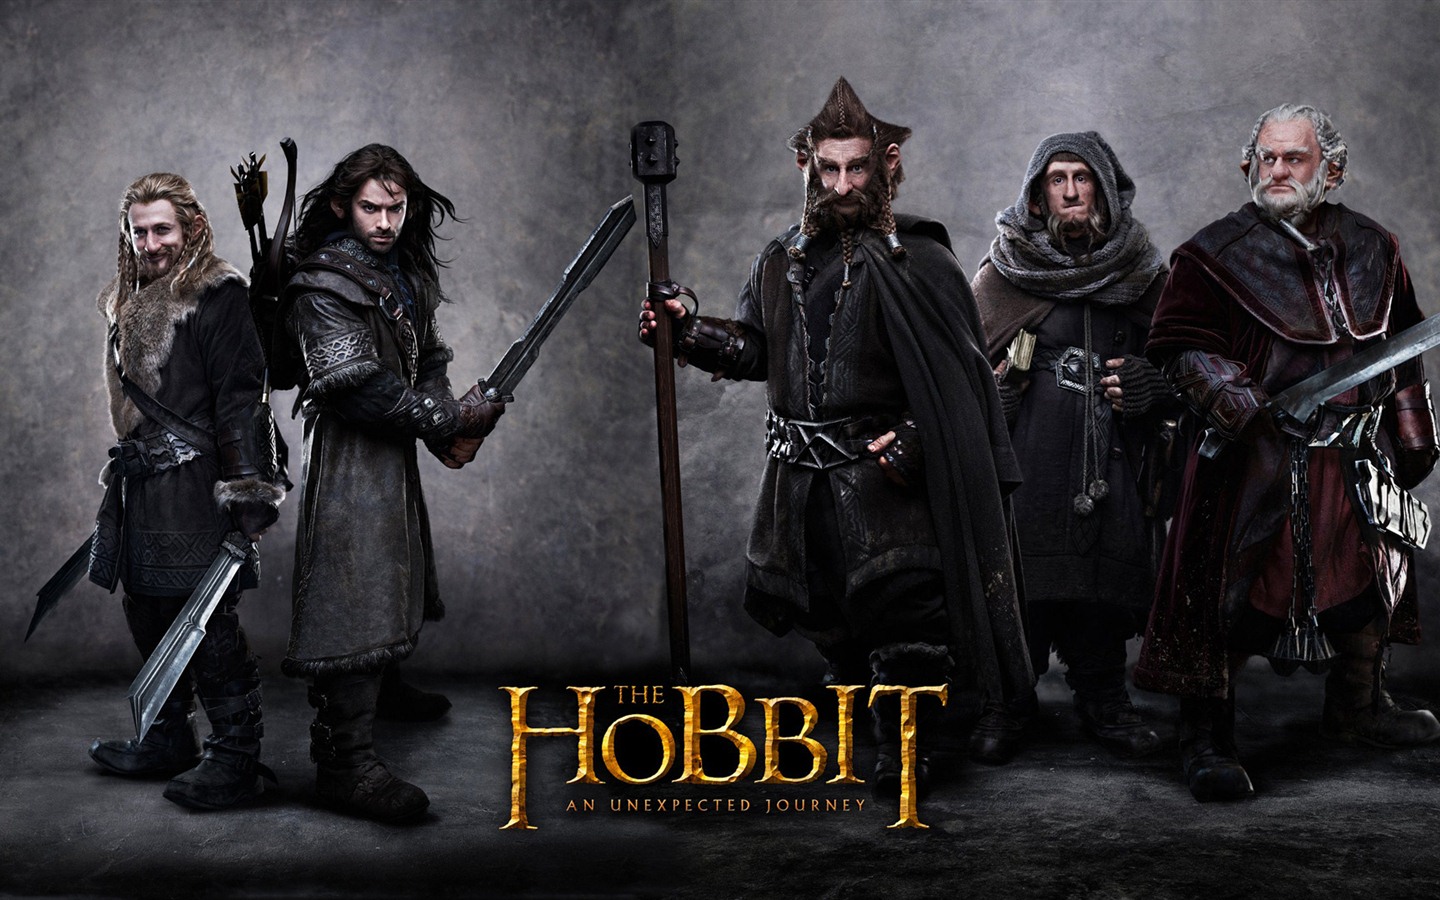 The Hobbit: An Unexpected Journey HD Wallpapers #9 - 1440x900